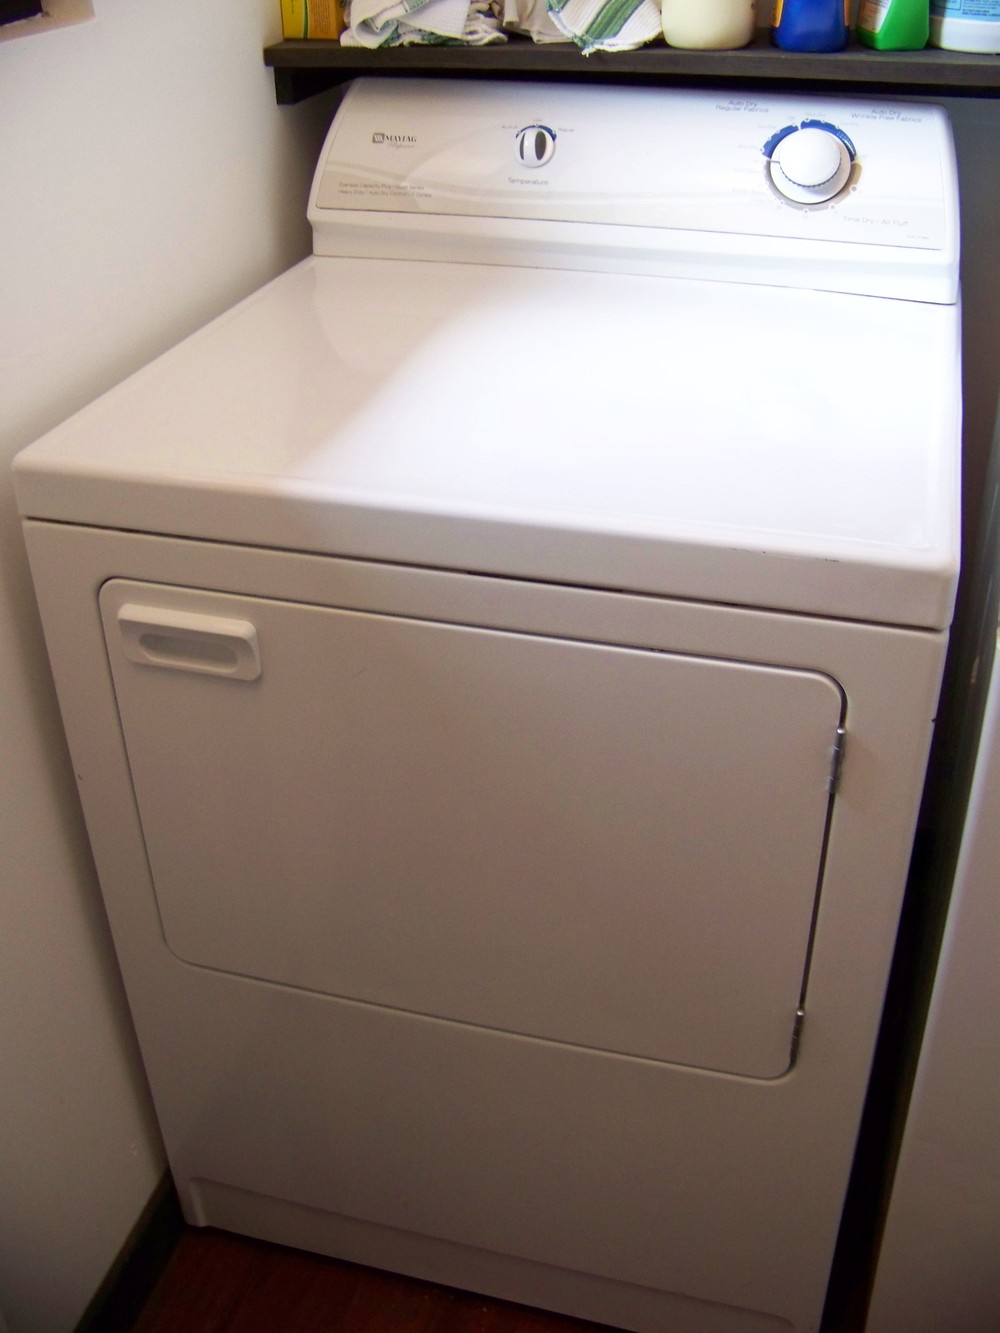 Maytag Performa Washer And Dryer